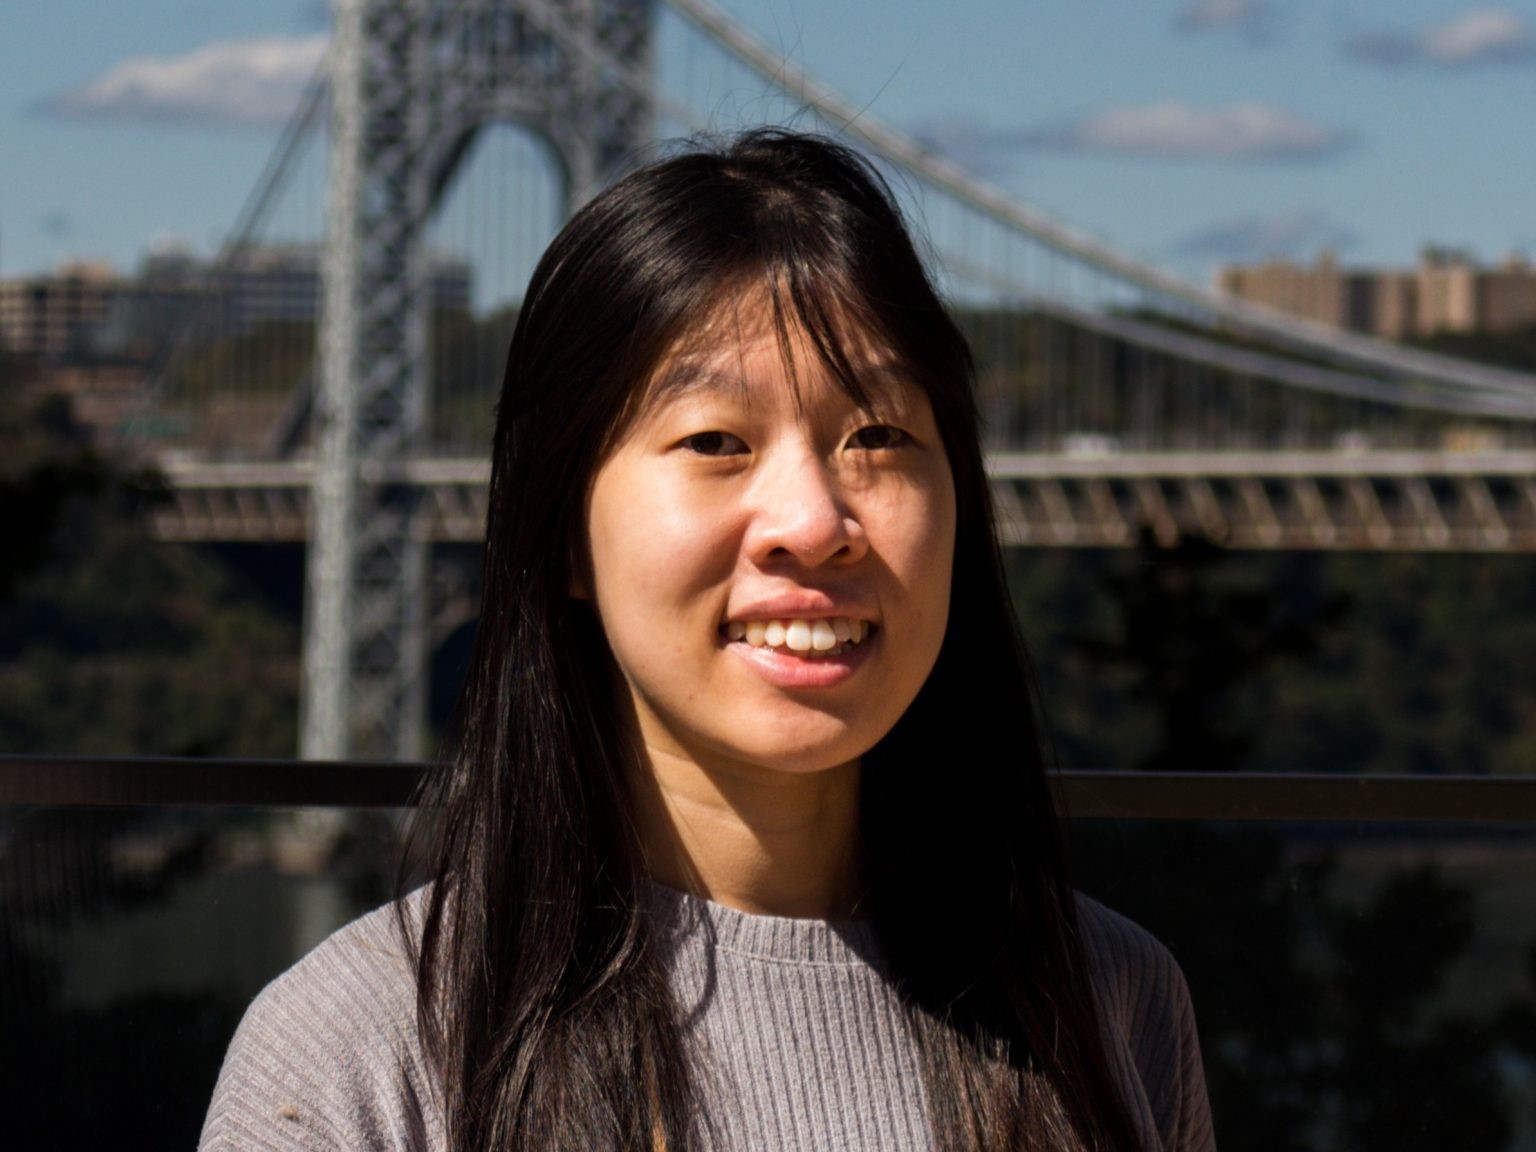 Caroline Juang is a PhD student at Columbia University who uses satellite data and other techniques to study climate hazards. She is also an artist and a STEM promoter.